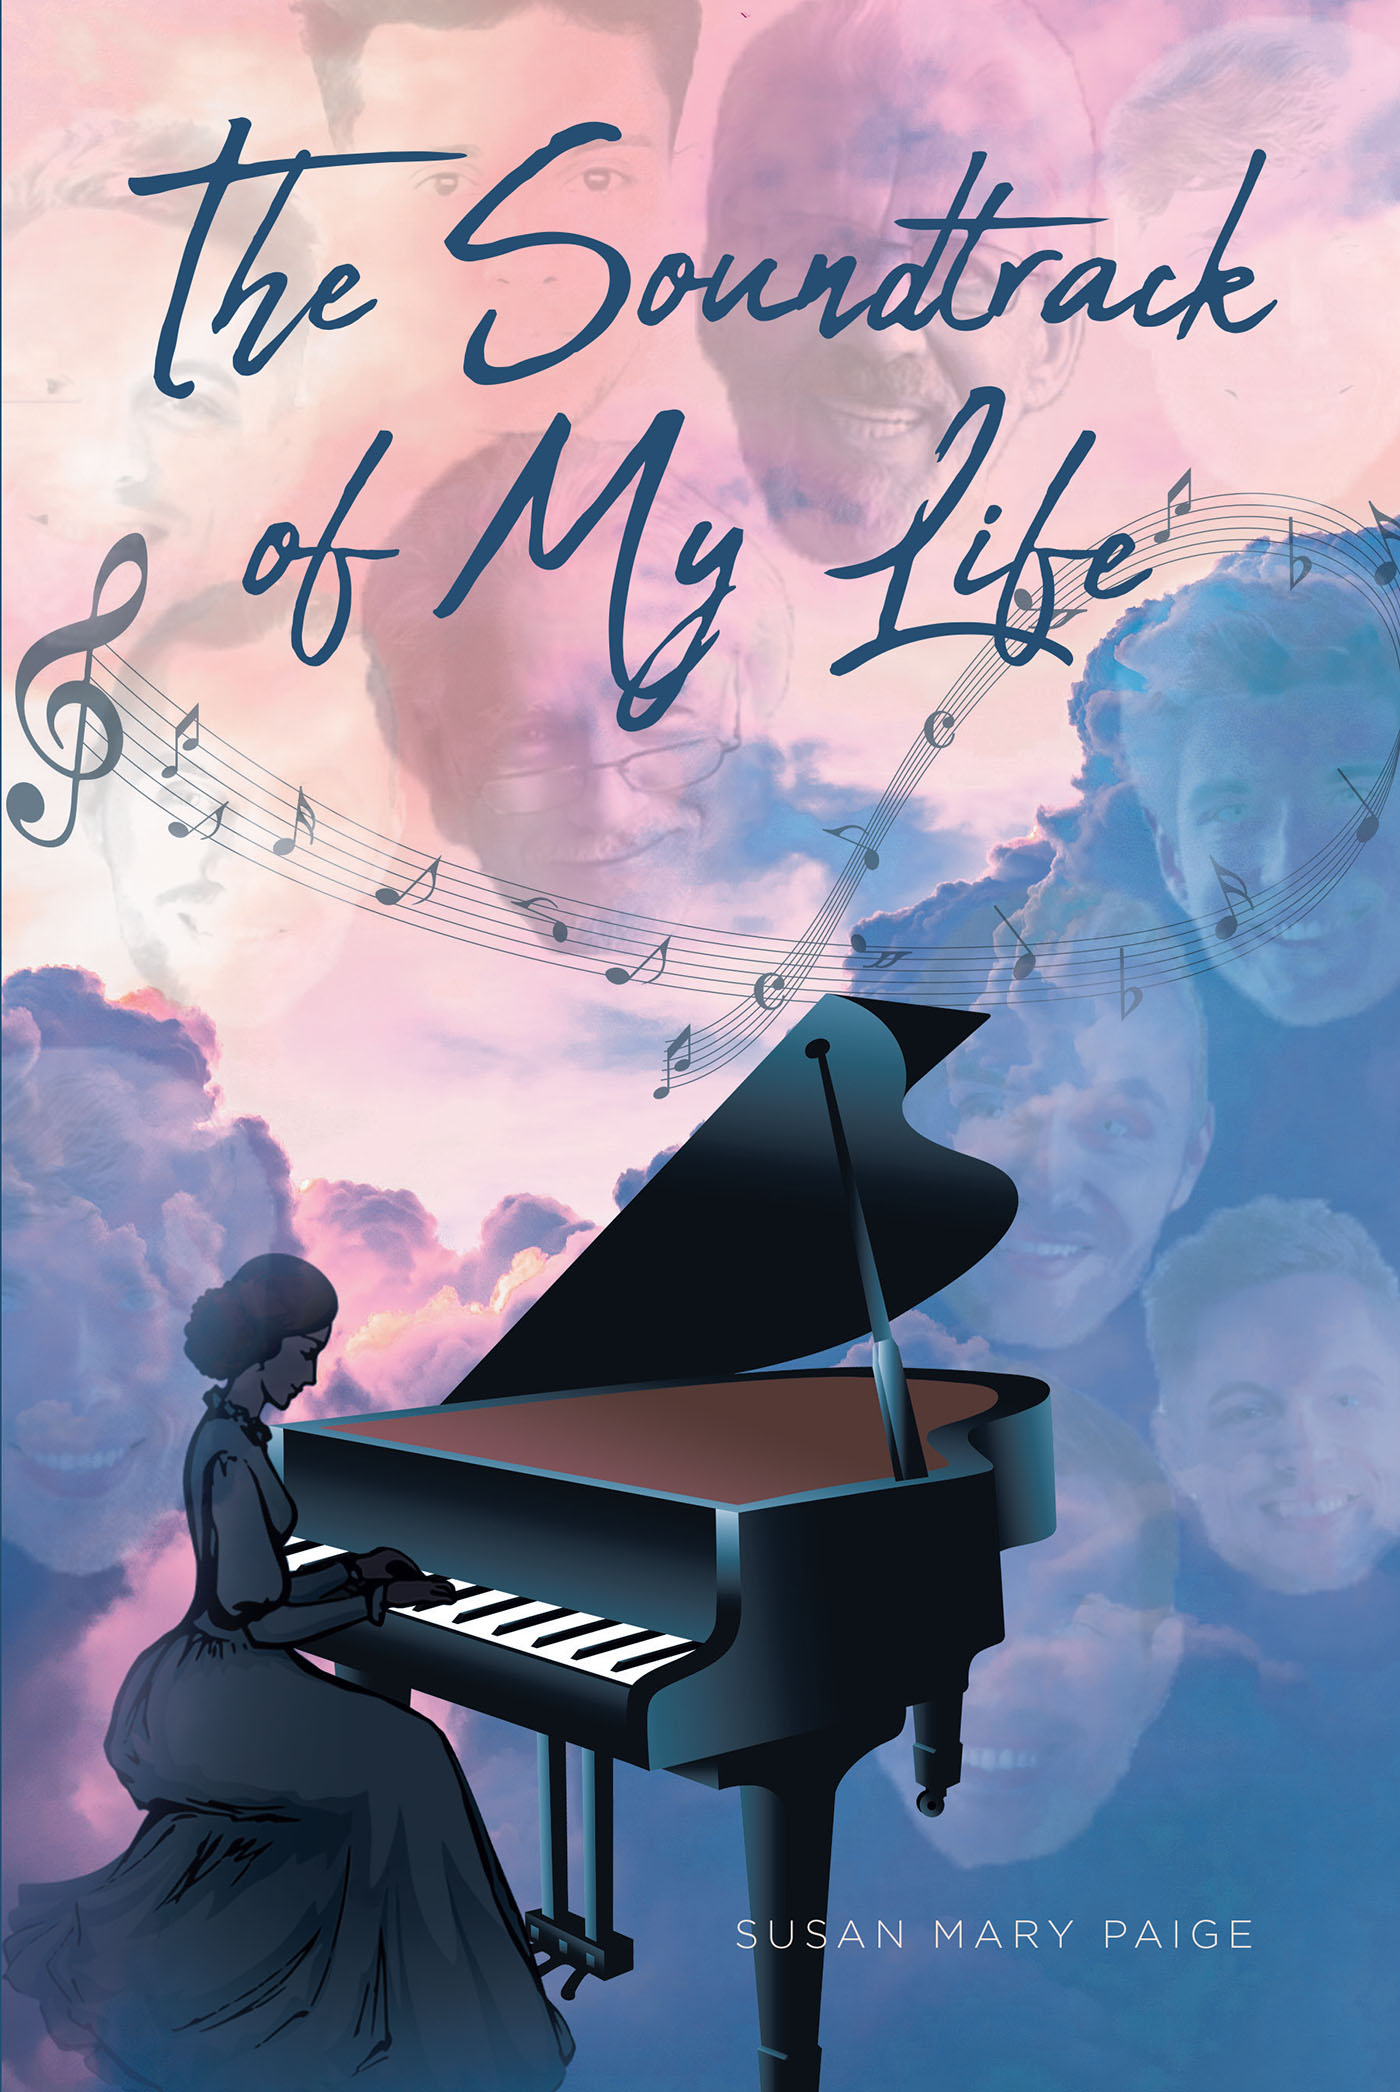 Author Susan Mary Paige’s New Book, "The Soundtrack of My Life," is a Compelling Memoir That Delves Into the Author’s Complex Family History